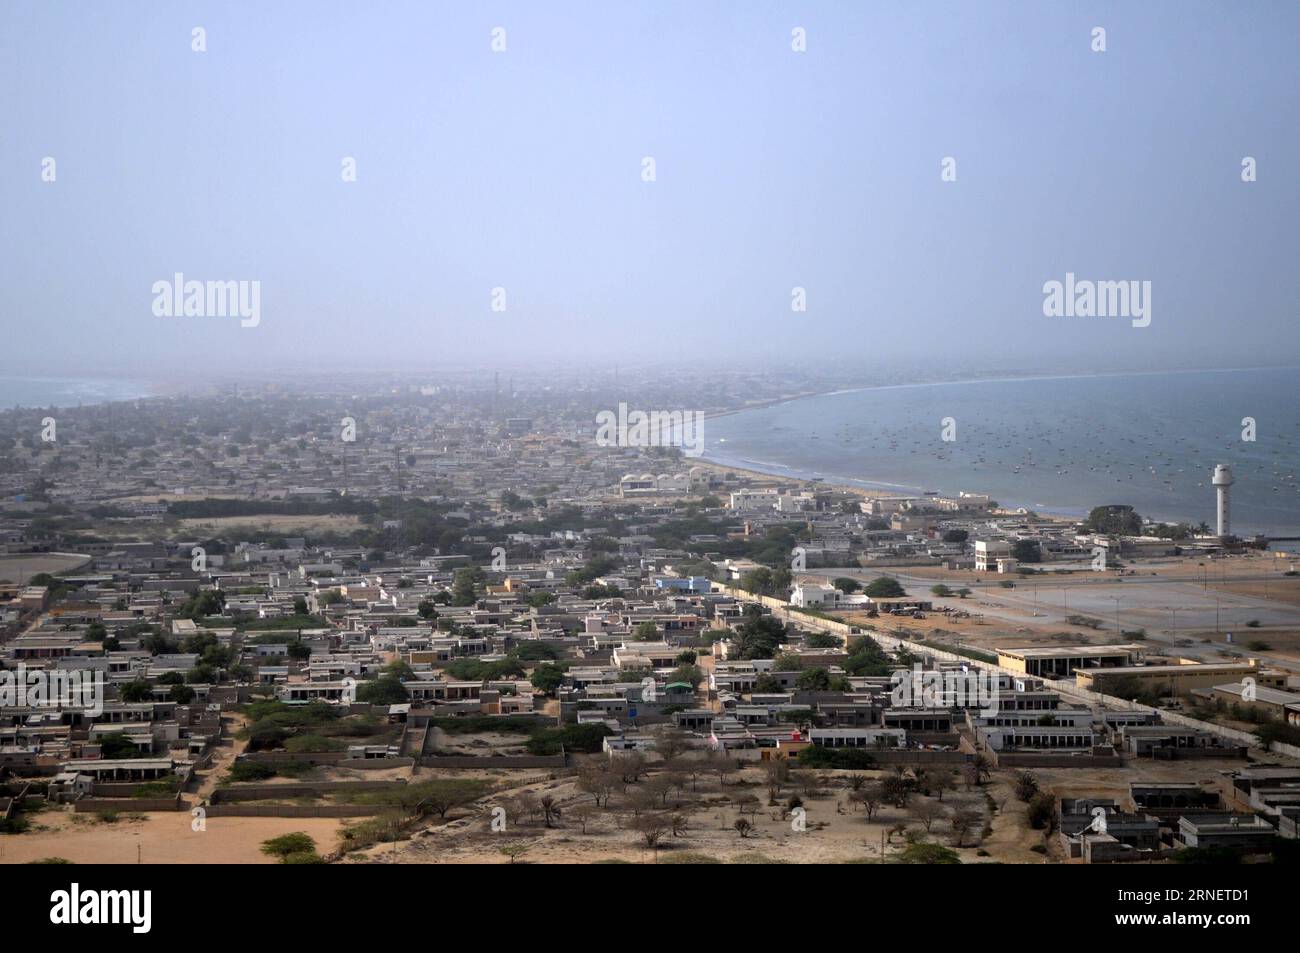 (160704) -- GWADAR, July 4, 2016 -- Photo taken on July 2, 2016, shows view of the city near Gwadar Port in southwest Pakistan. Gwadar Port is a warm-water, deep-sea port situated on the Arabian Sea in Balochistan province of Pakistan. China and Pakistan agreed to build China-Pakistan Economic Corridor (CPEC), a major and pilot project under the Belt and Road Initiative, to connect the Pakistani Gwadar port with Kashgar city in China s Xinjiang Uygur Autonomous Region. ) PAKISTAN-GWADAR PORT-BELT AND ROAD INITIATIVE AhmadxKamal PUBLICATIONxNOTxINxCHN   160704 Gwadar July 4 2016 Photo Taken ON Stock Photo